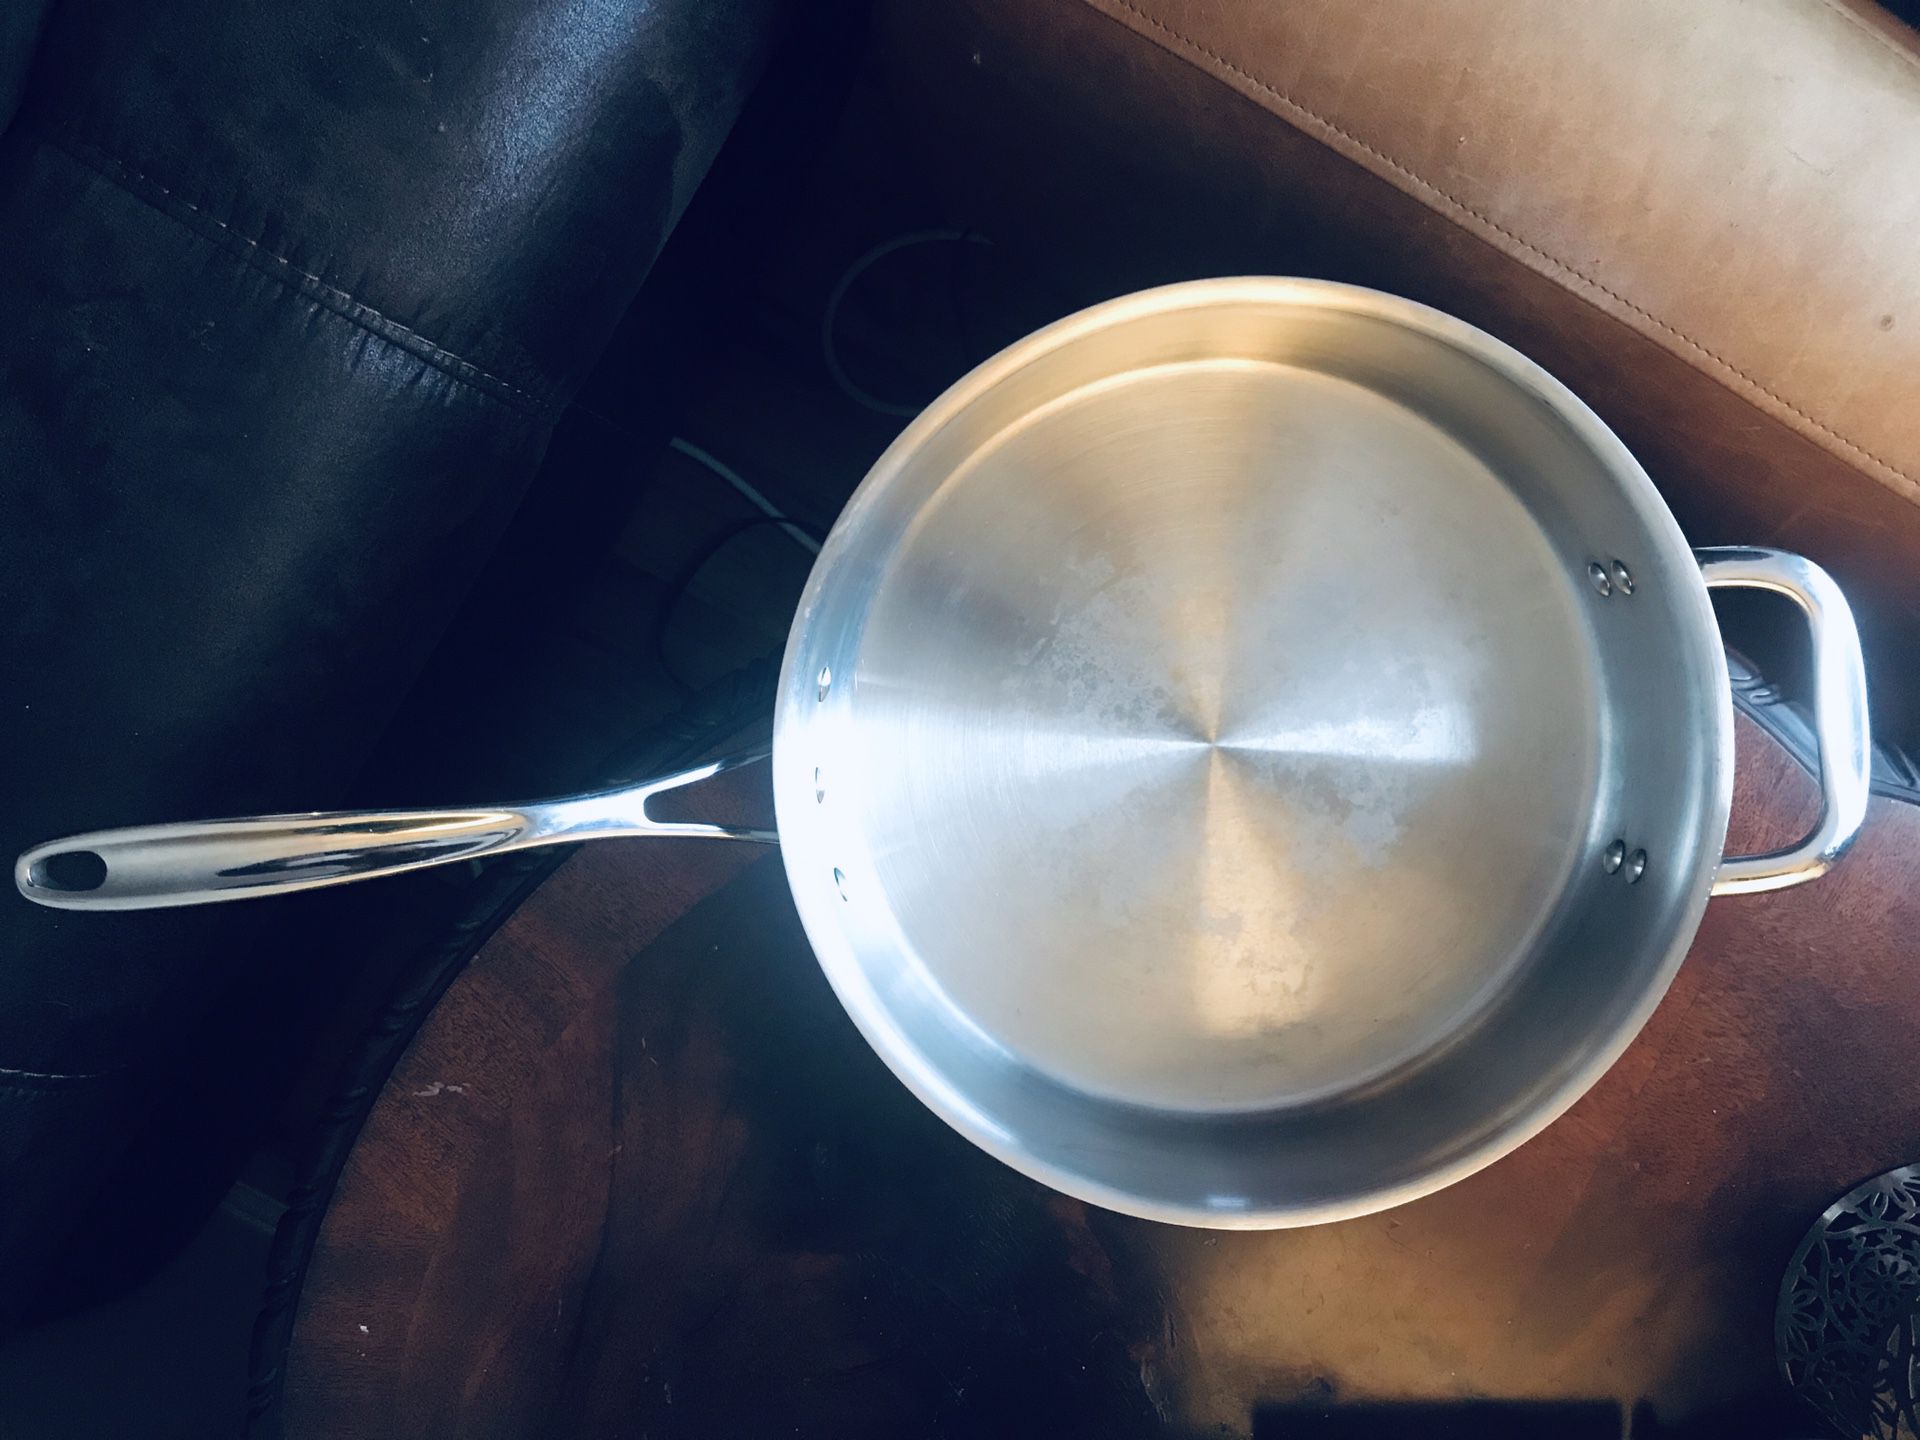 Calphalon 3 Qt 10" Stainless Steel Sauce Pan - Quality for less - Gently used